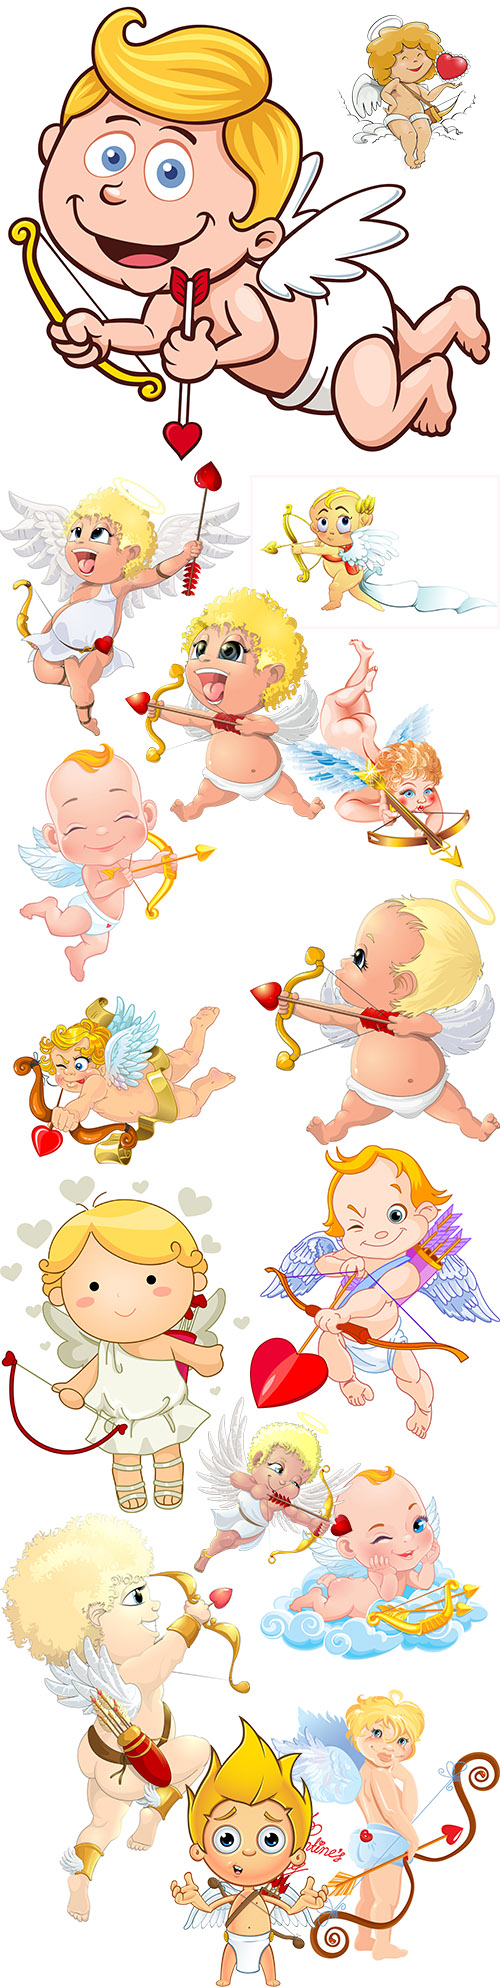 Funny cartoon cupid St. Valentine's day romantic collection